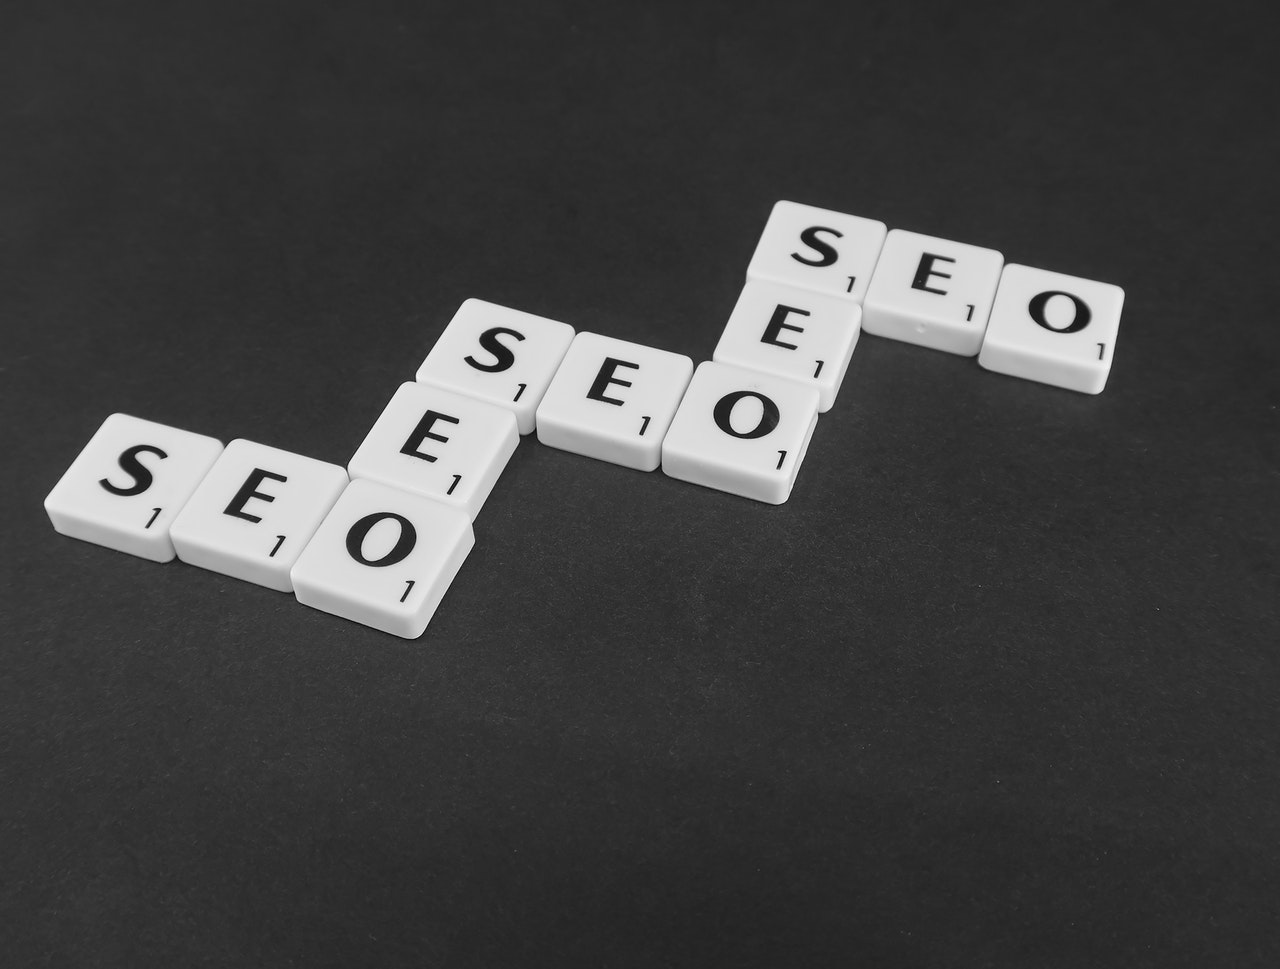 4 SEO Trends for 2022